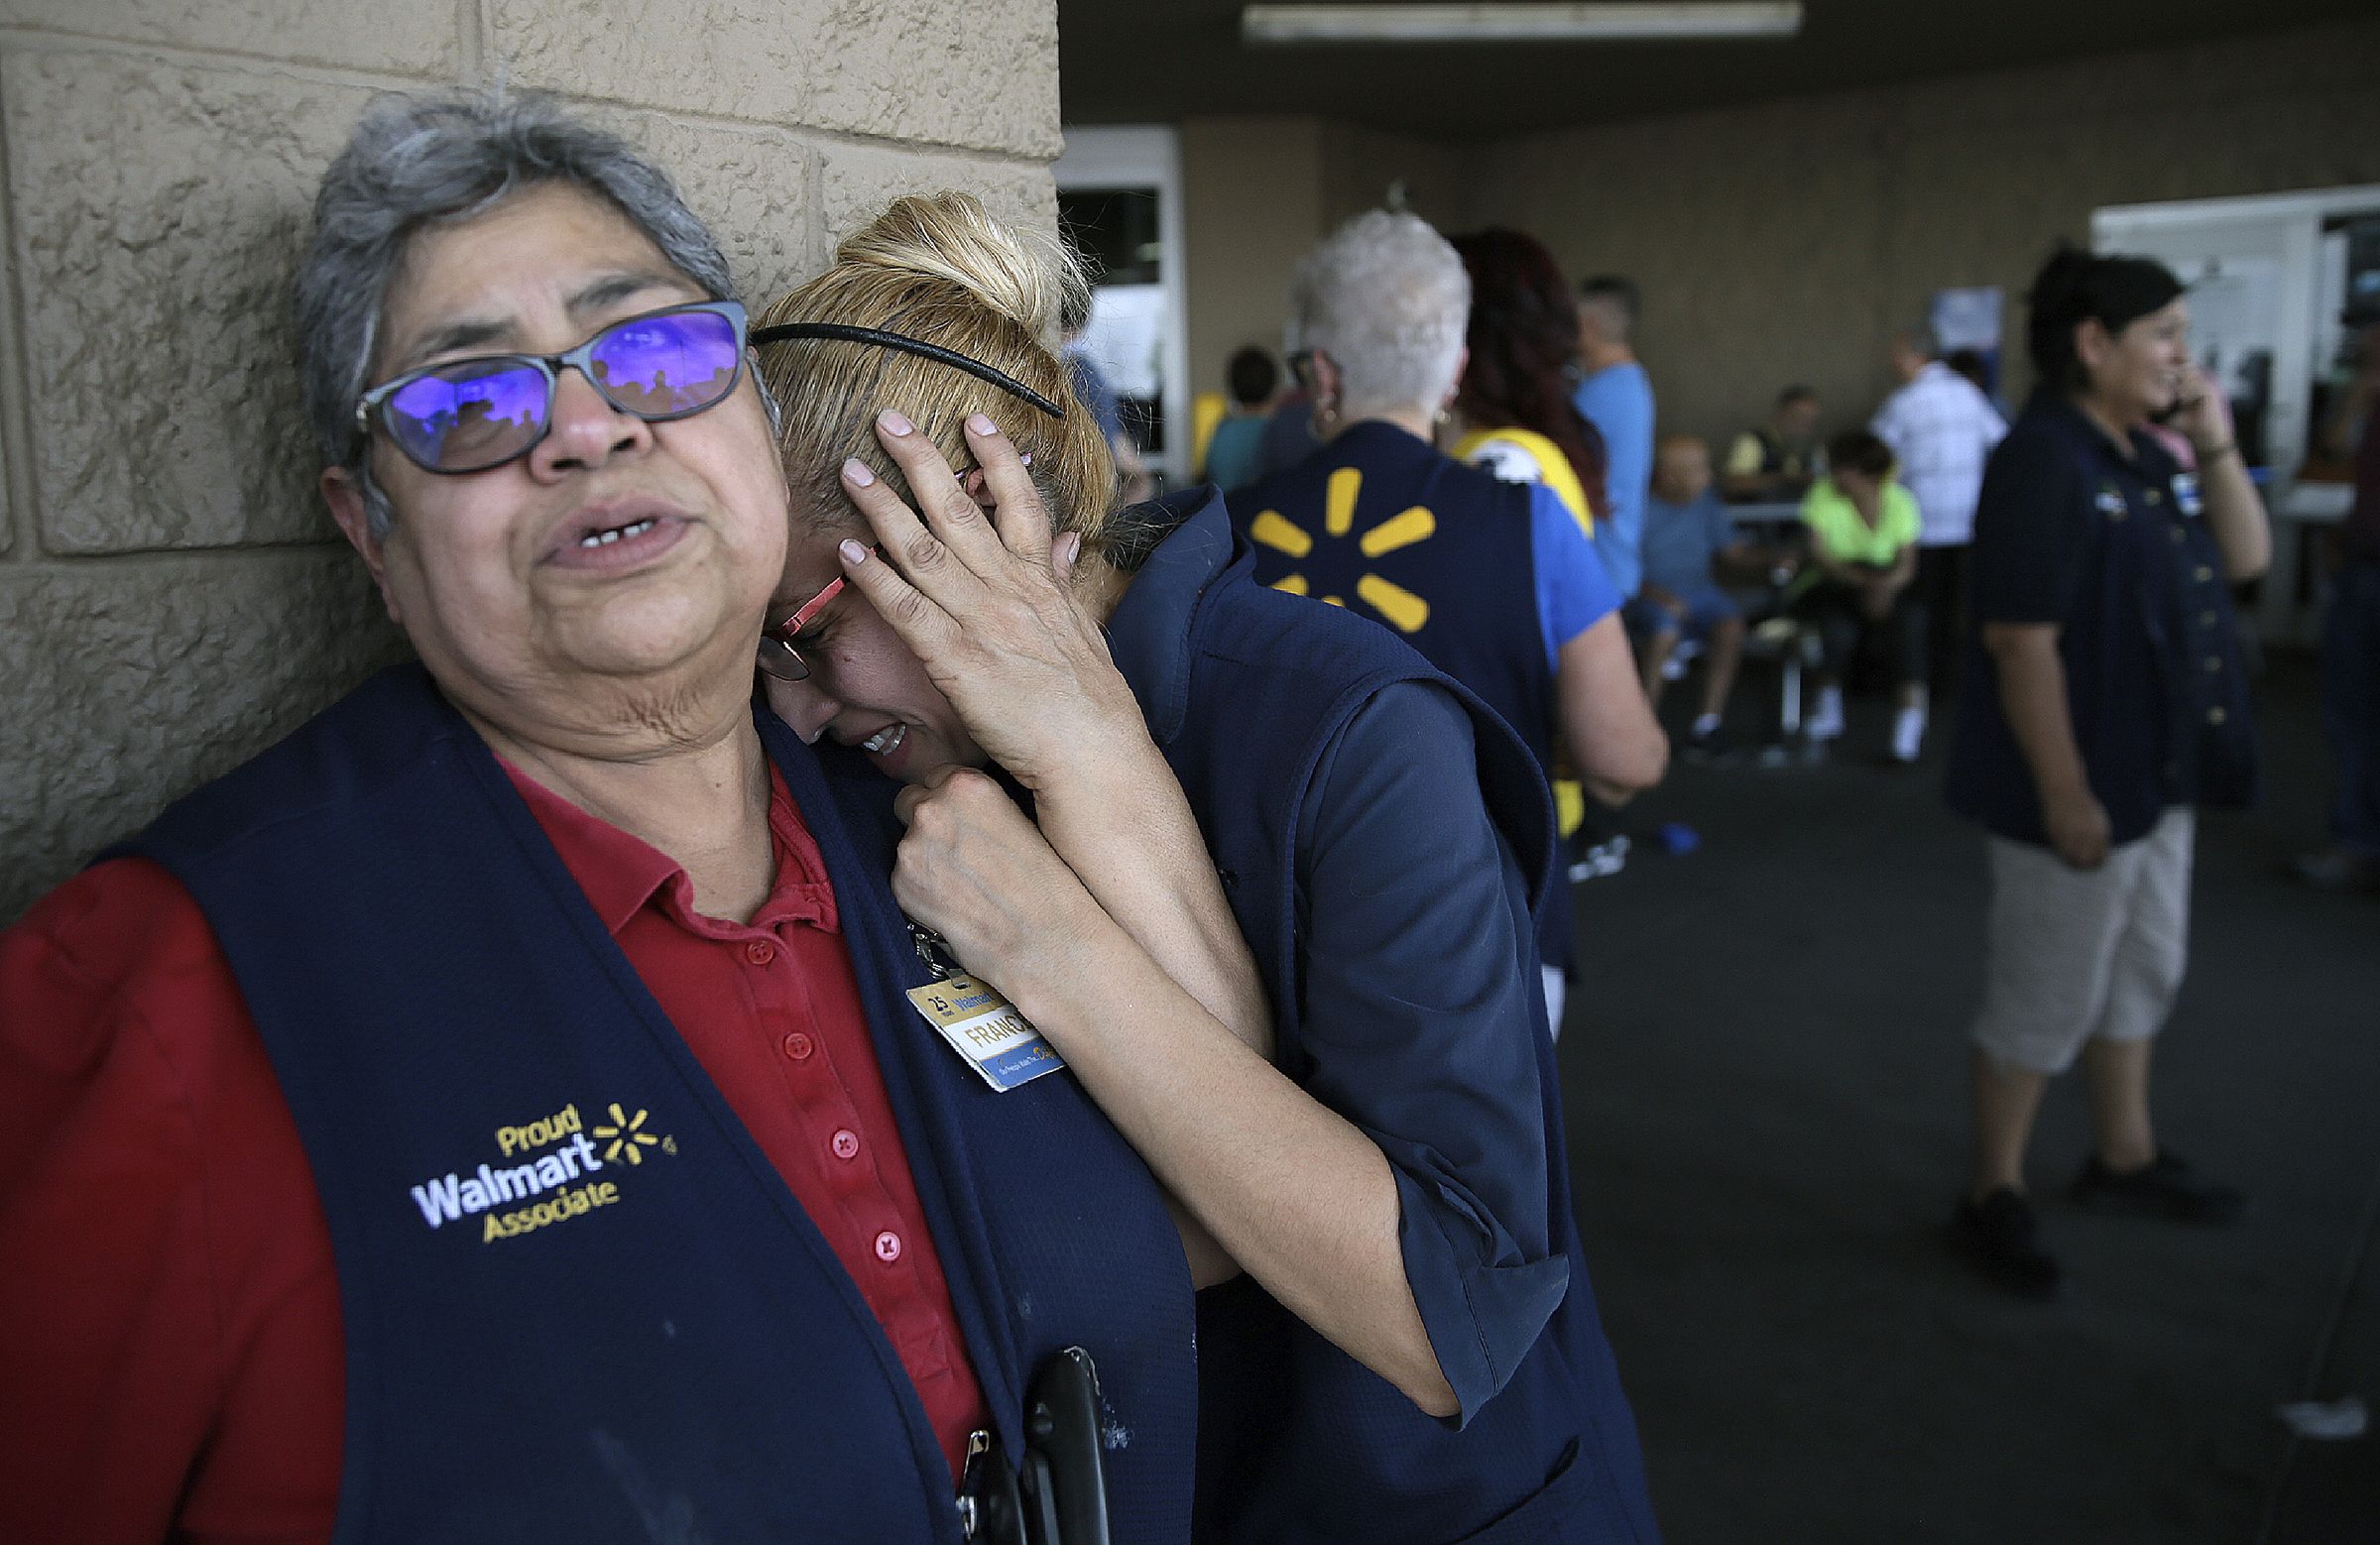 PreviousNext Walmart employees react after an active shooter opened fire at the store in El Paso, Texas, Saturday, Aug. 3